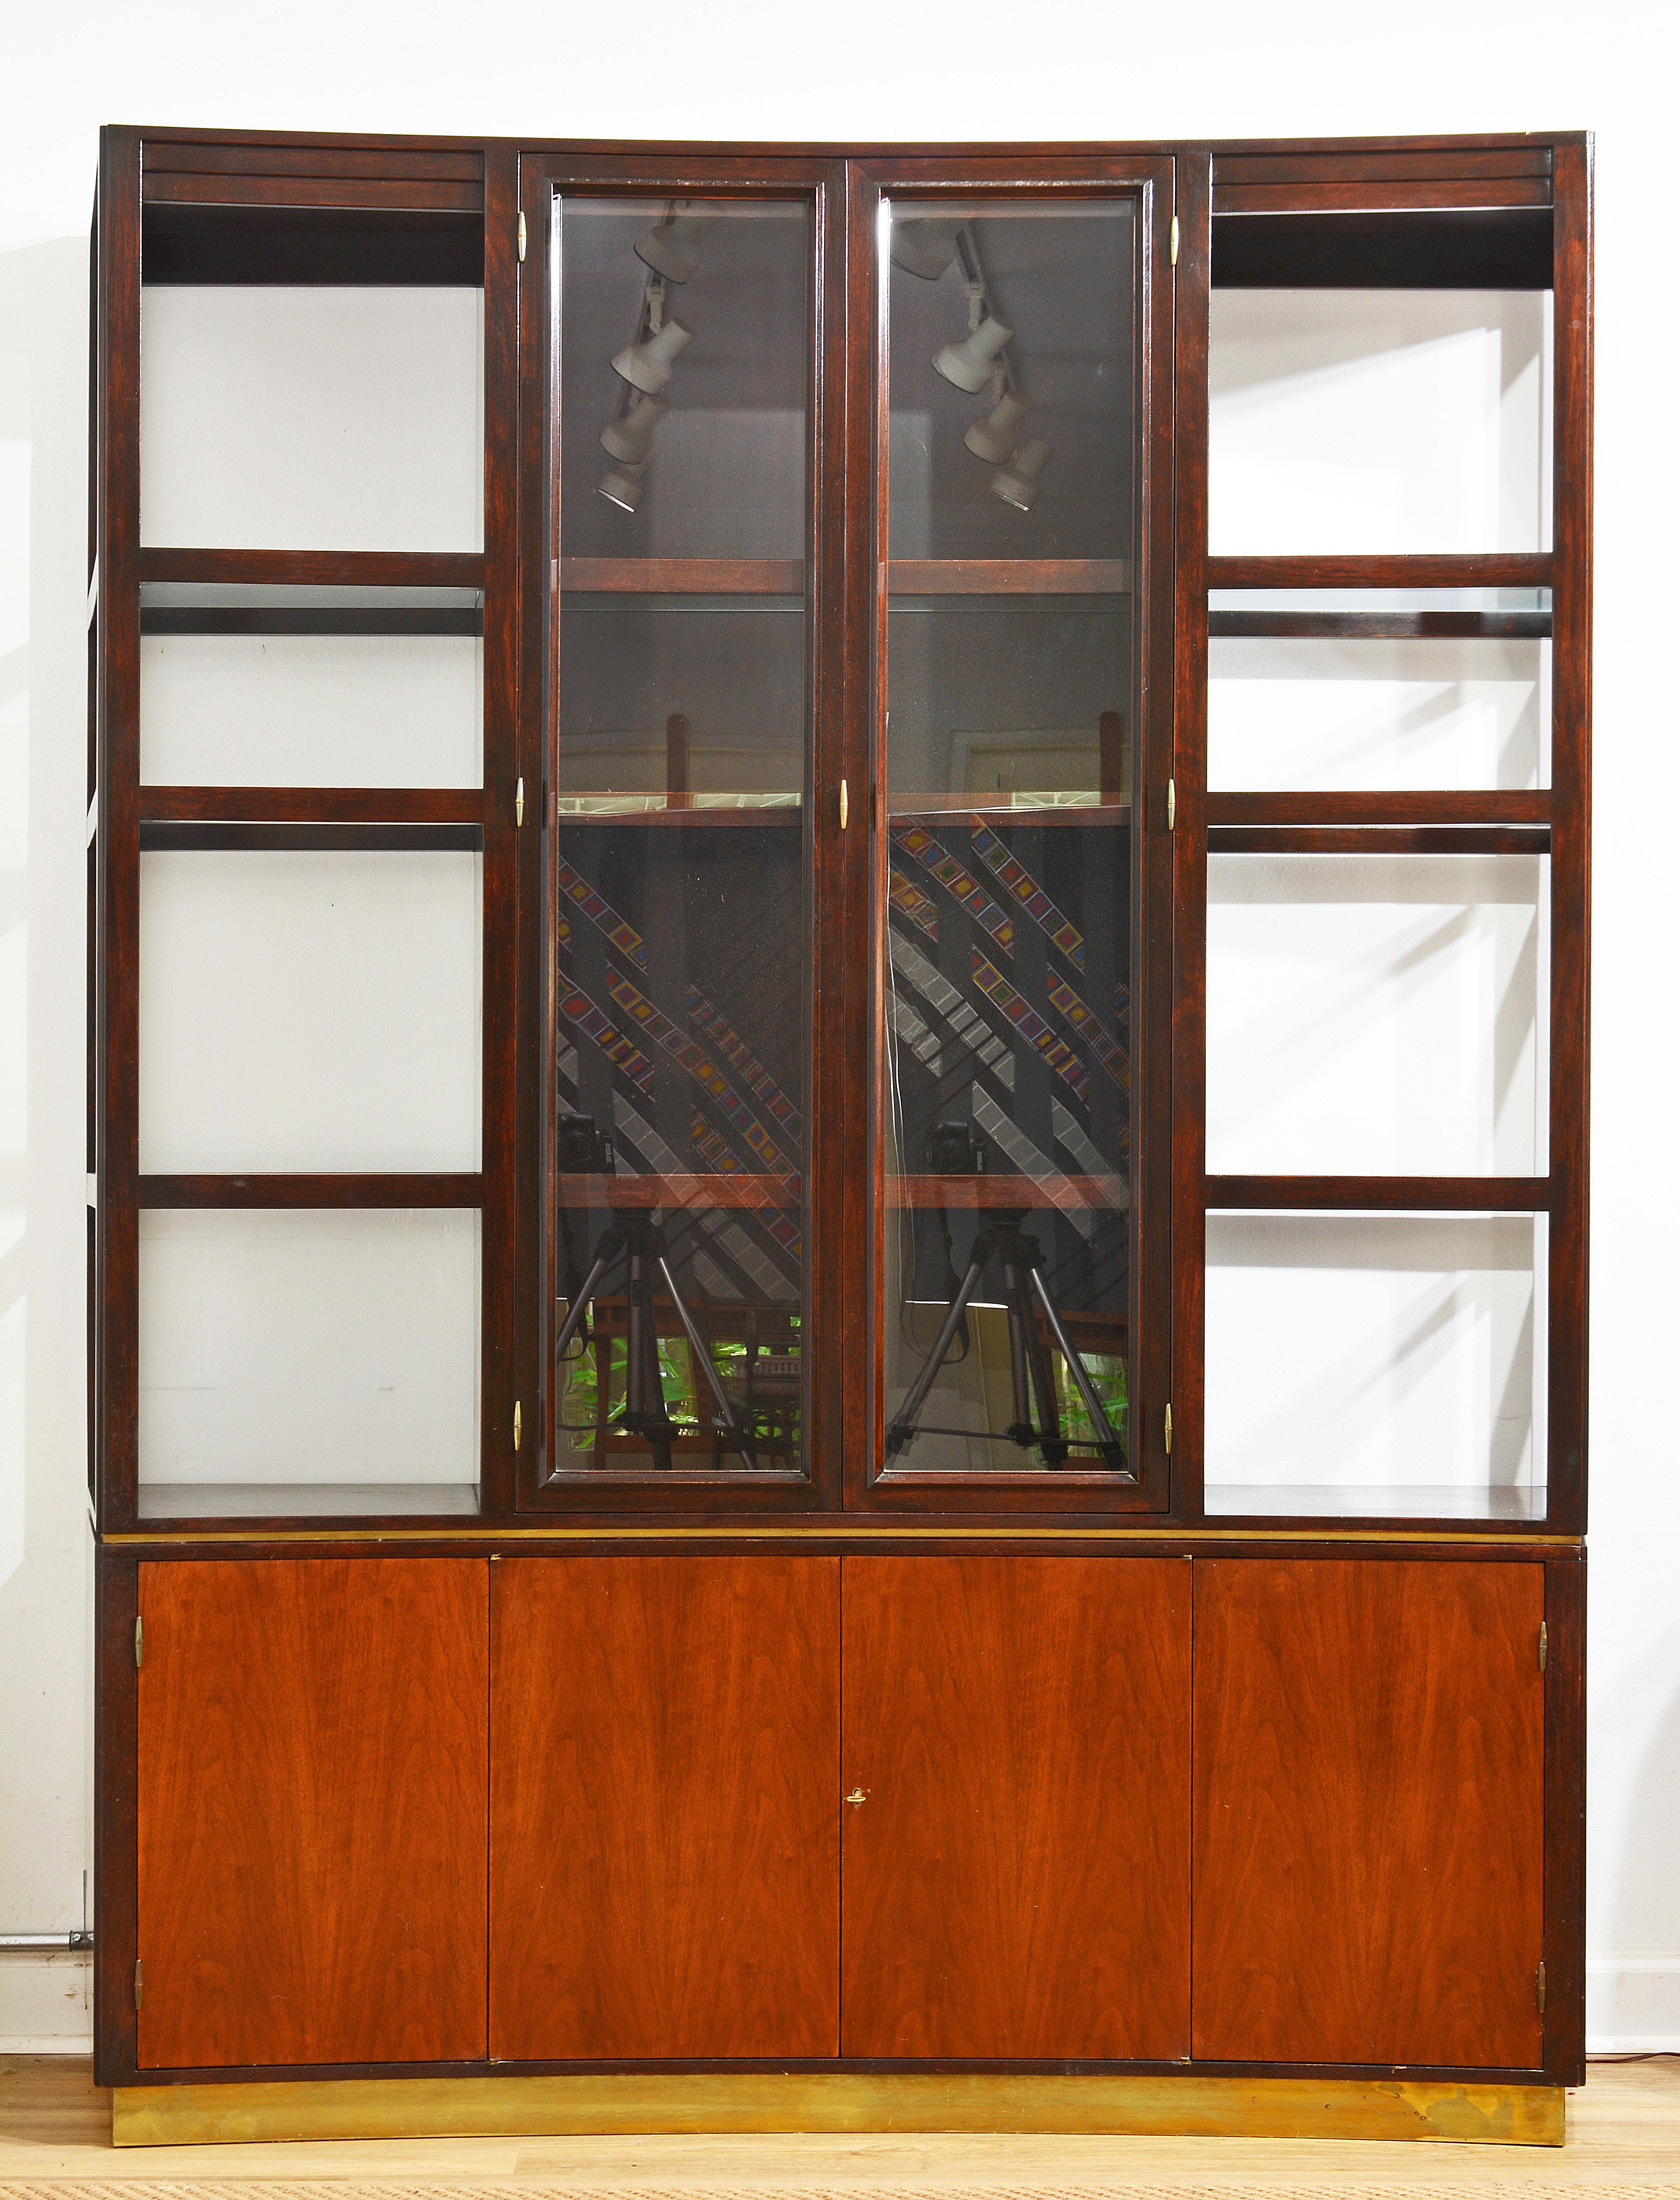 Designed by Edward Wormley with a 'Less is More' aestethic this walnut wallunit offers three shelved cabinets under three tier glass shelving incorporating a center display cabinet with glazed doors. The front of the unit is slightly concave adding